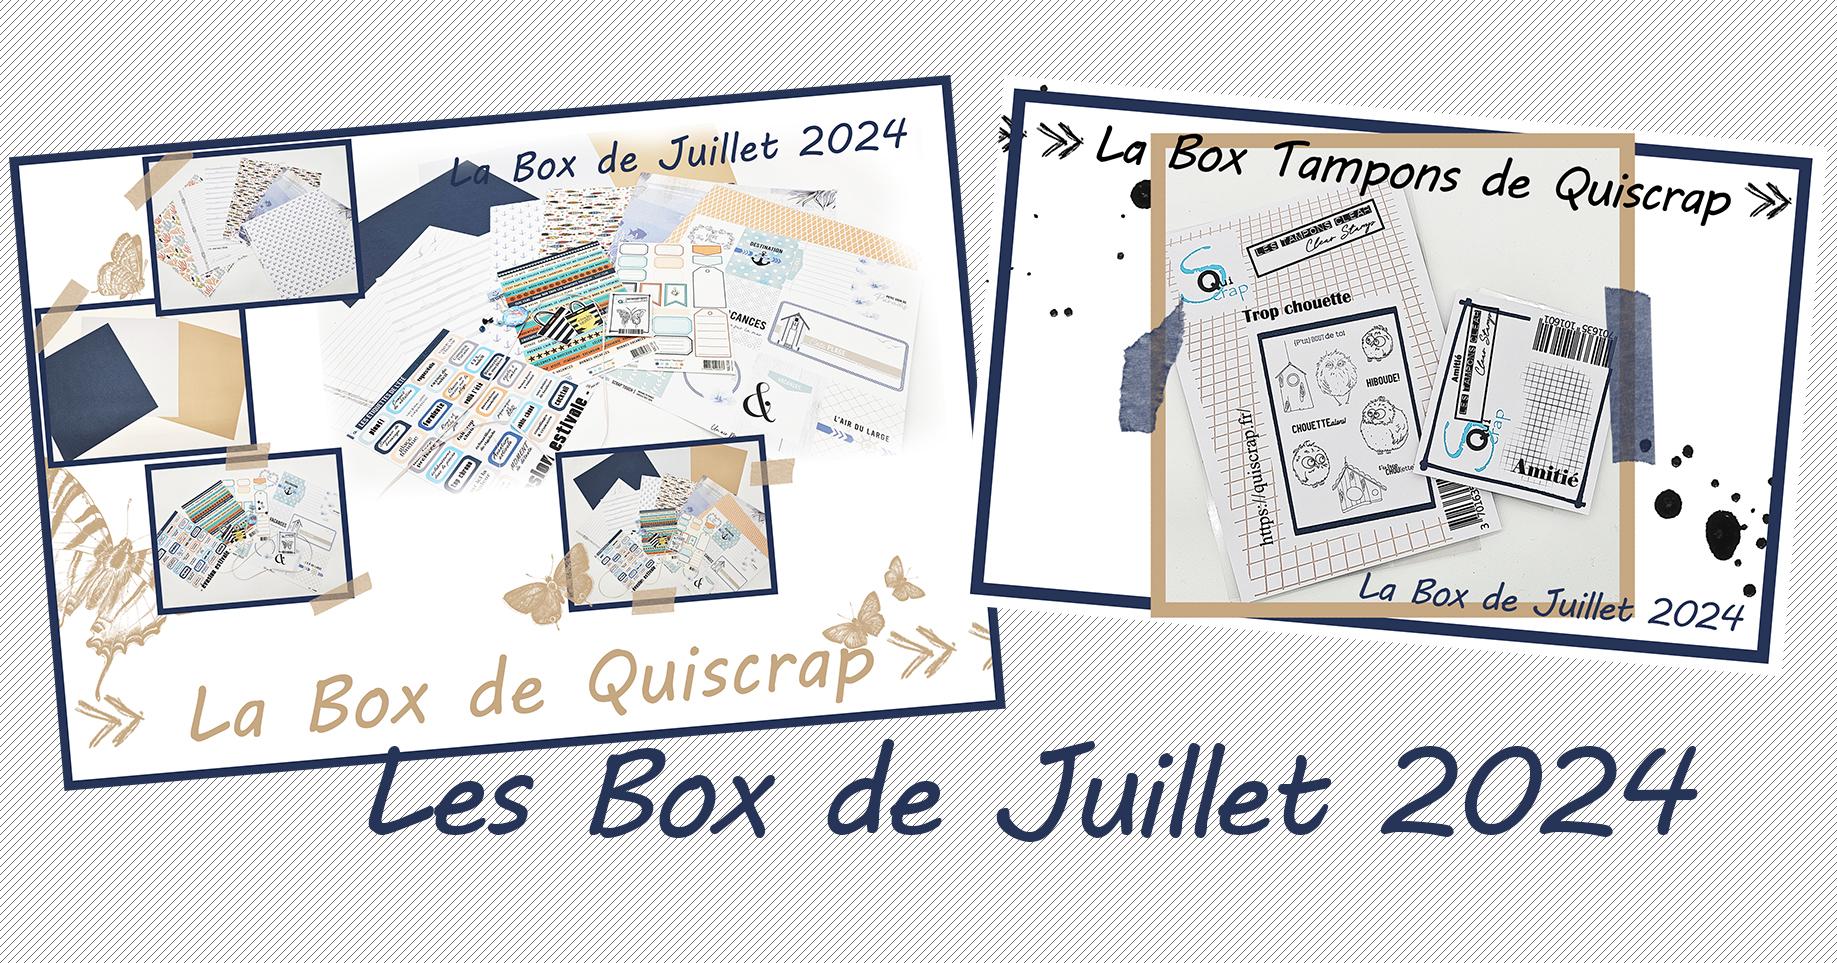 You are currently viewing Les Box de Juillet 2024